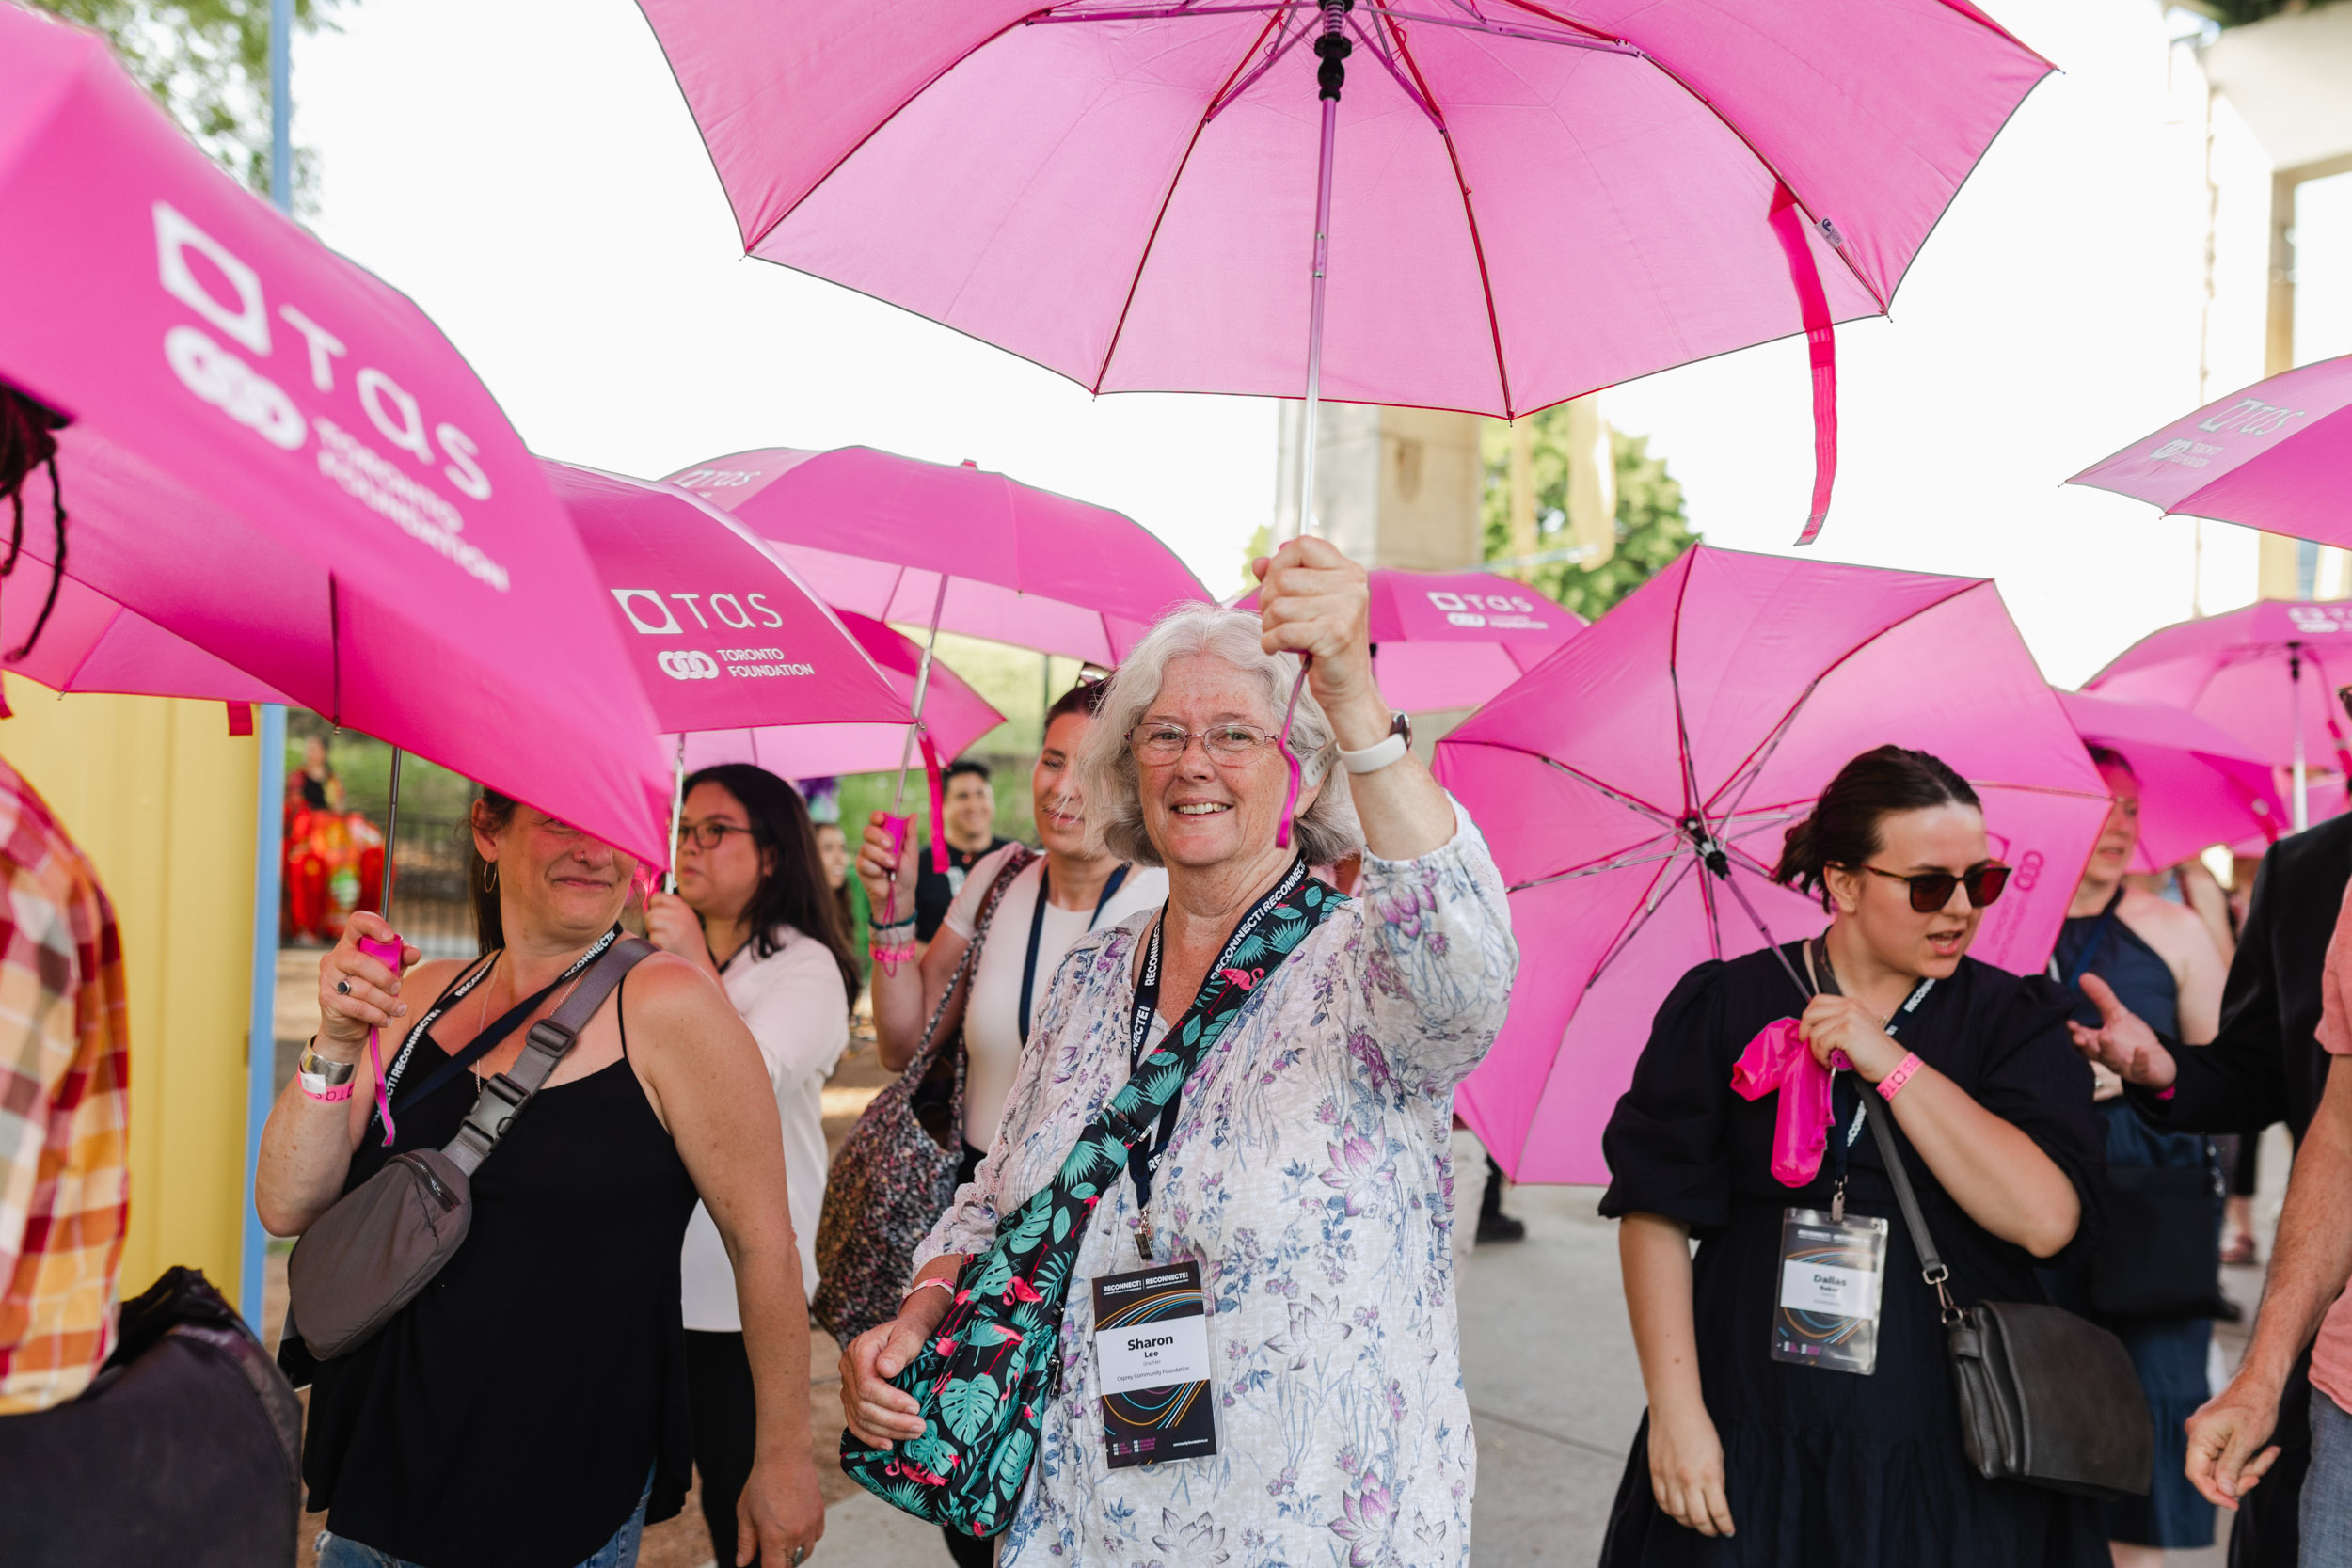 Conference attendees with pink umbrellas.